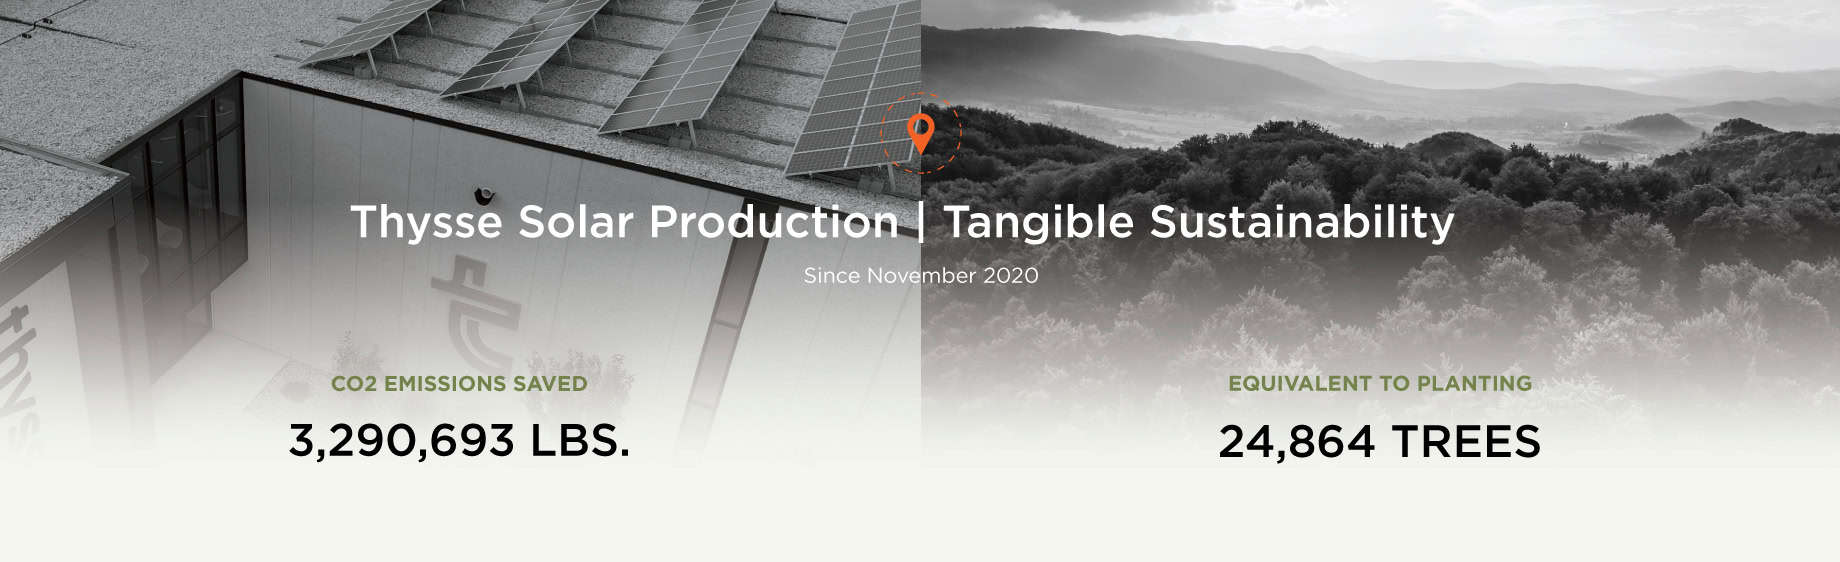 Thysse Solar Production Graphic